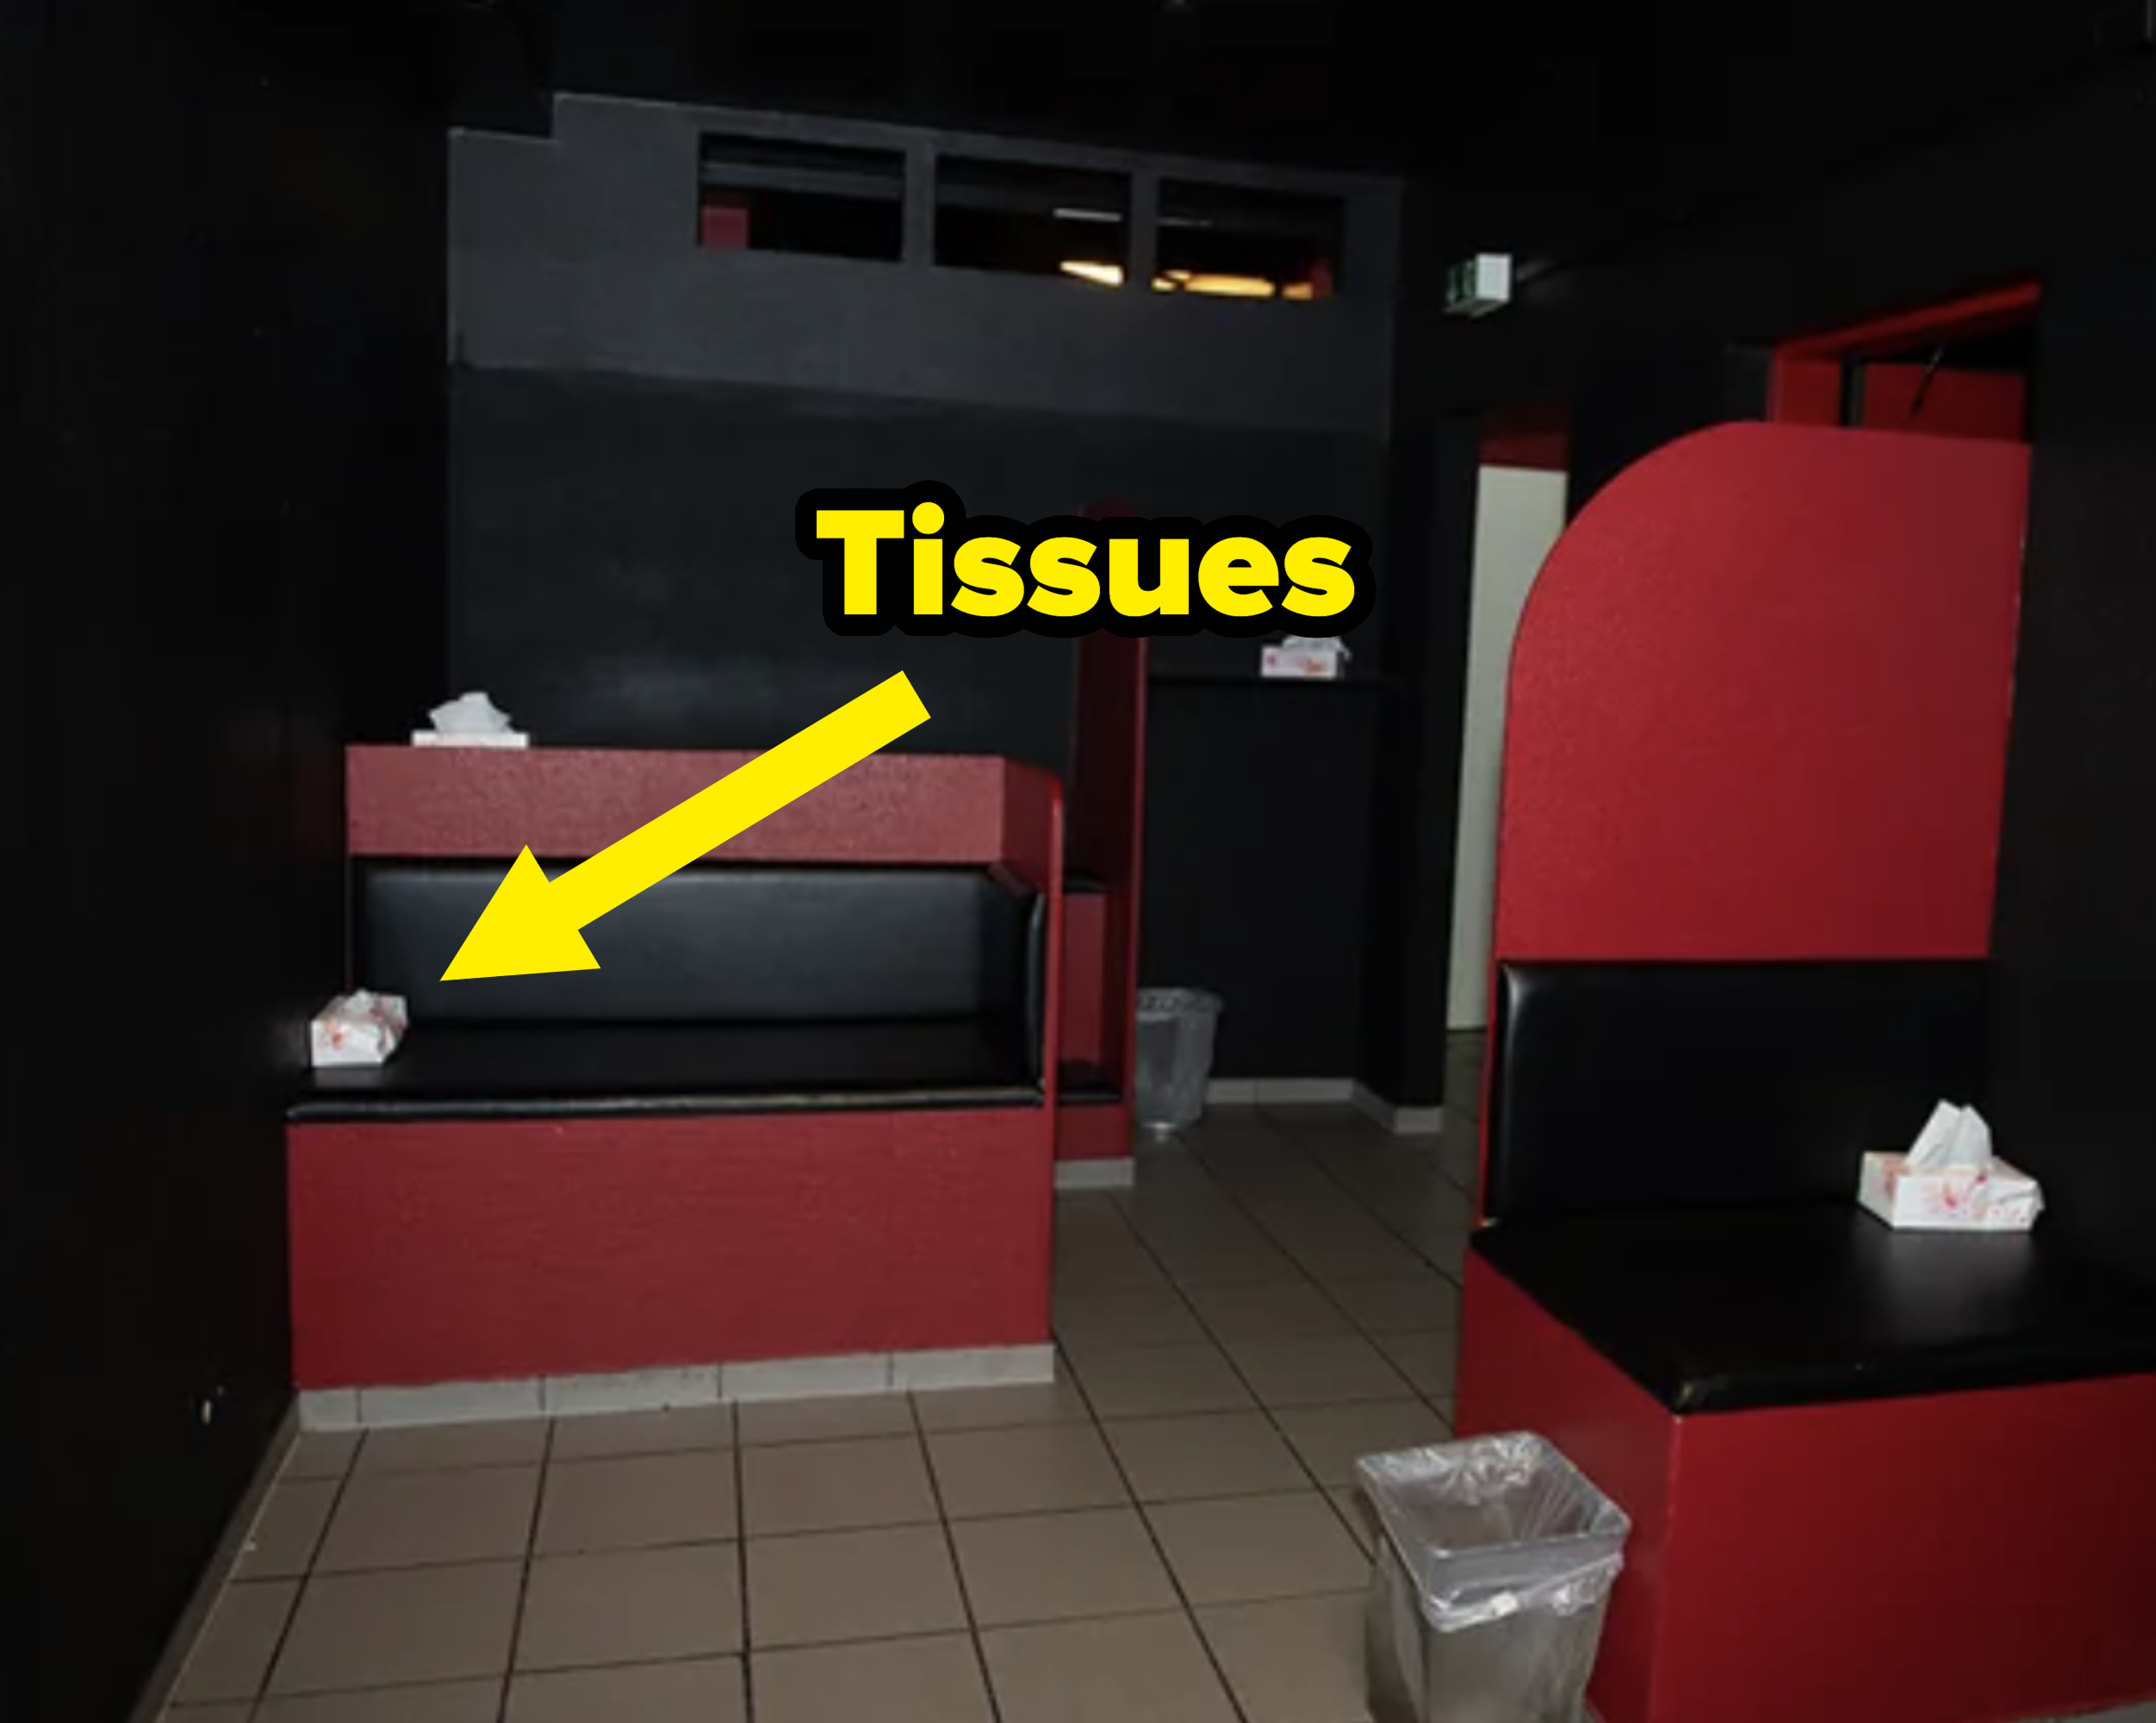 Empty movie theater seats with tissues on them, suggestive of a pornographic film